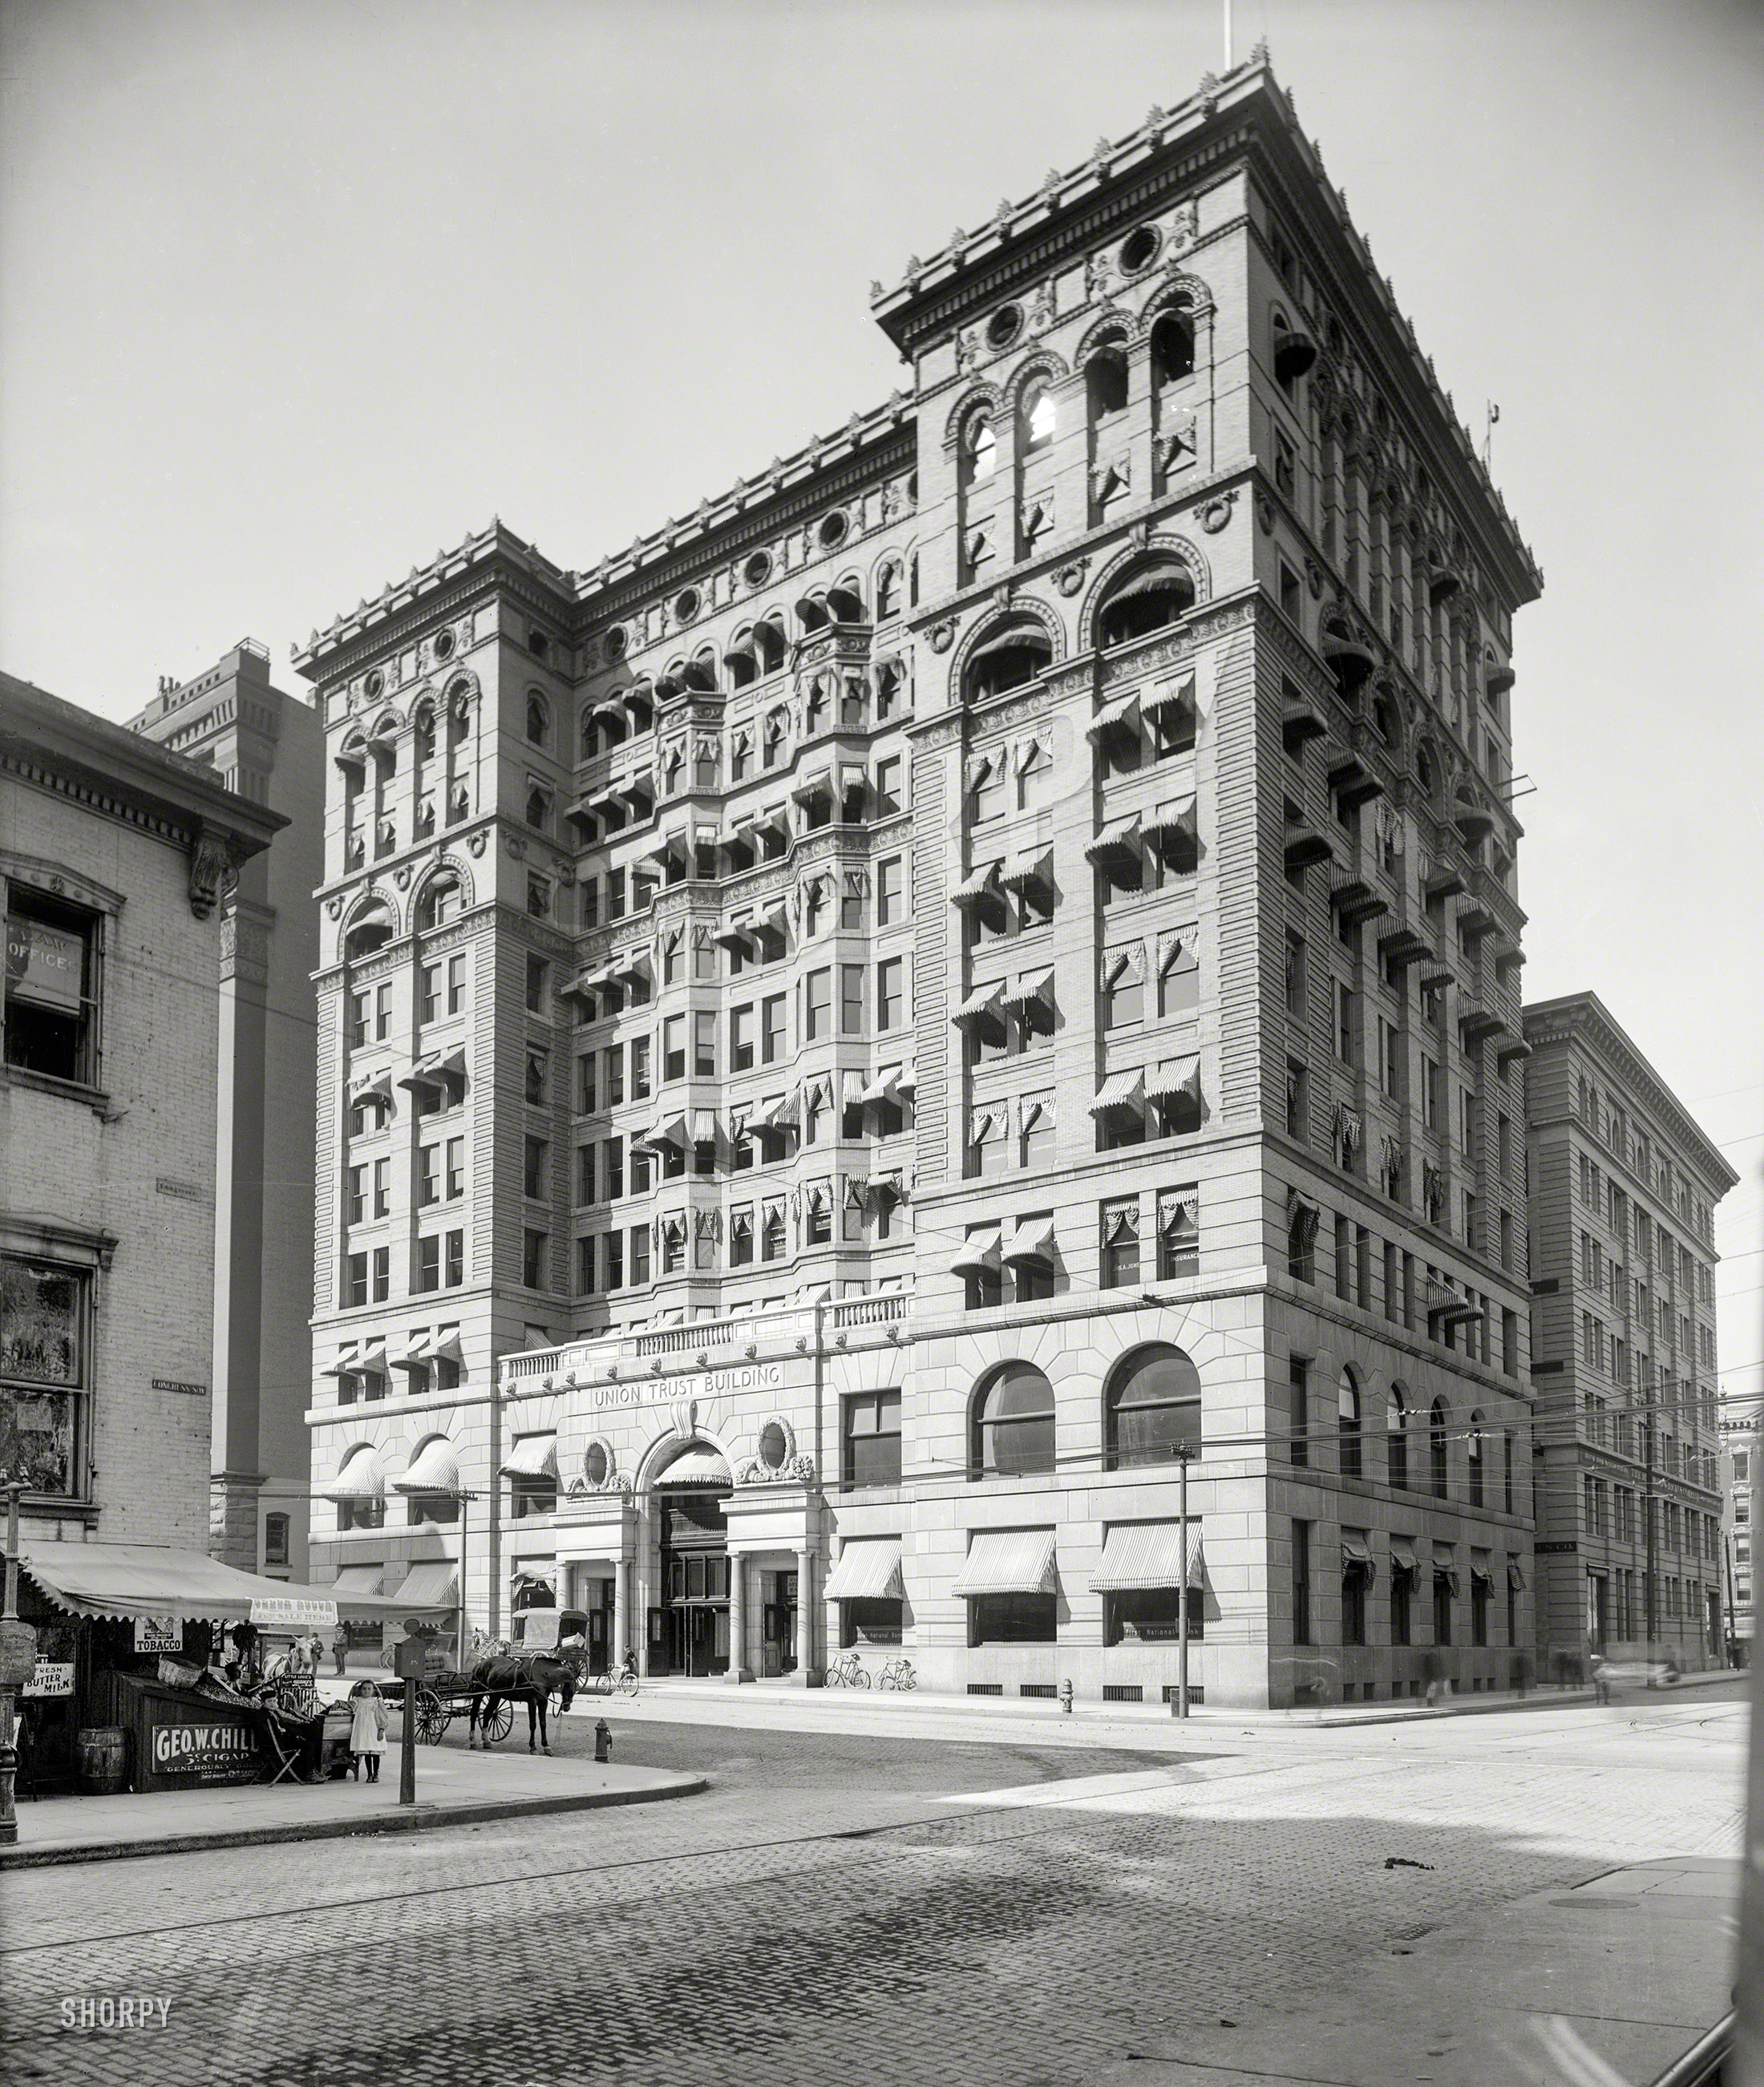 1900. "Union Trust Building, Detroit." Romanesque Revival wedding cake at Griswold and Congress that went up in 1896, came down in 1956. View full size.